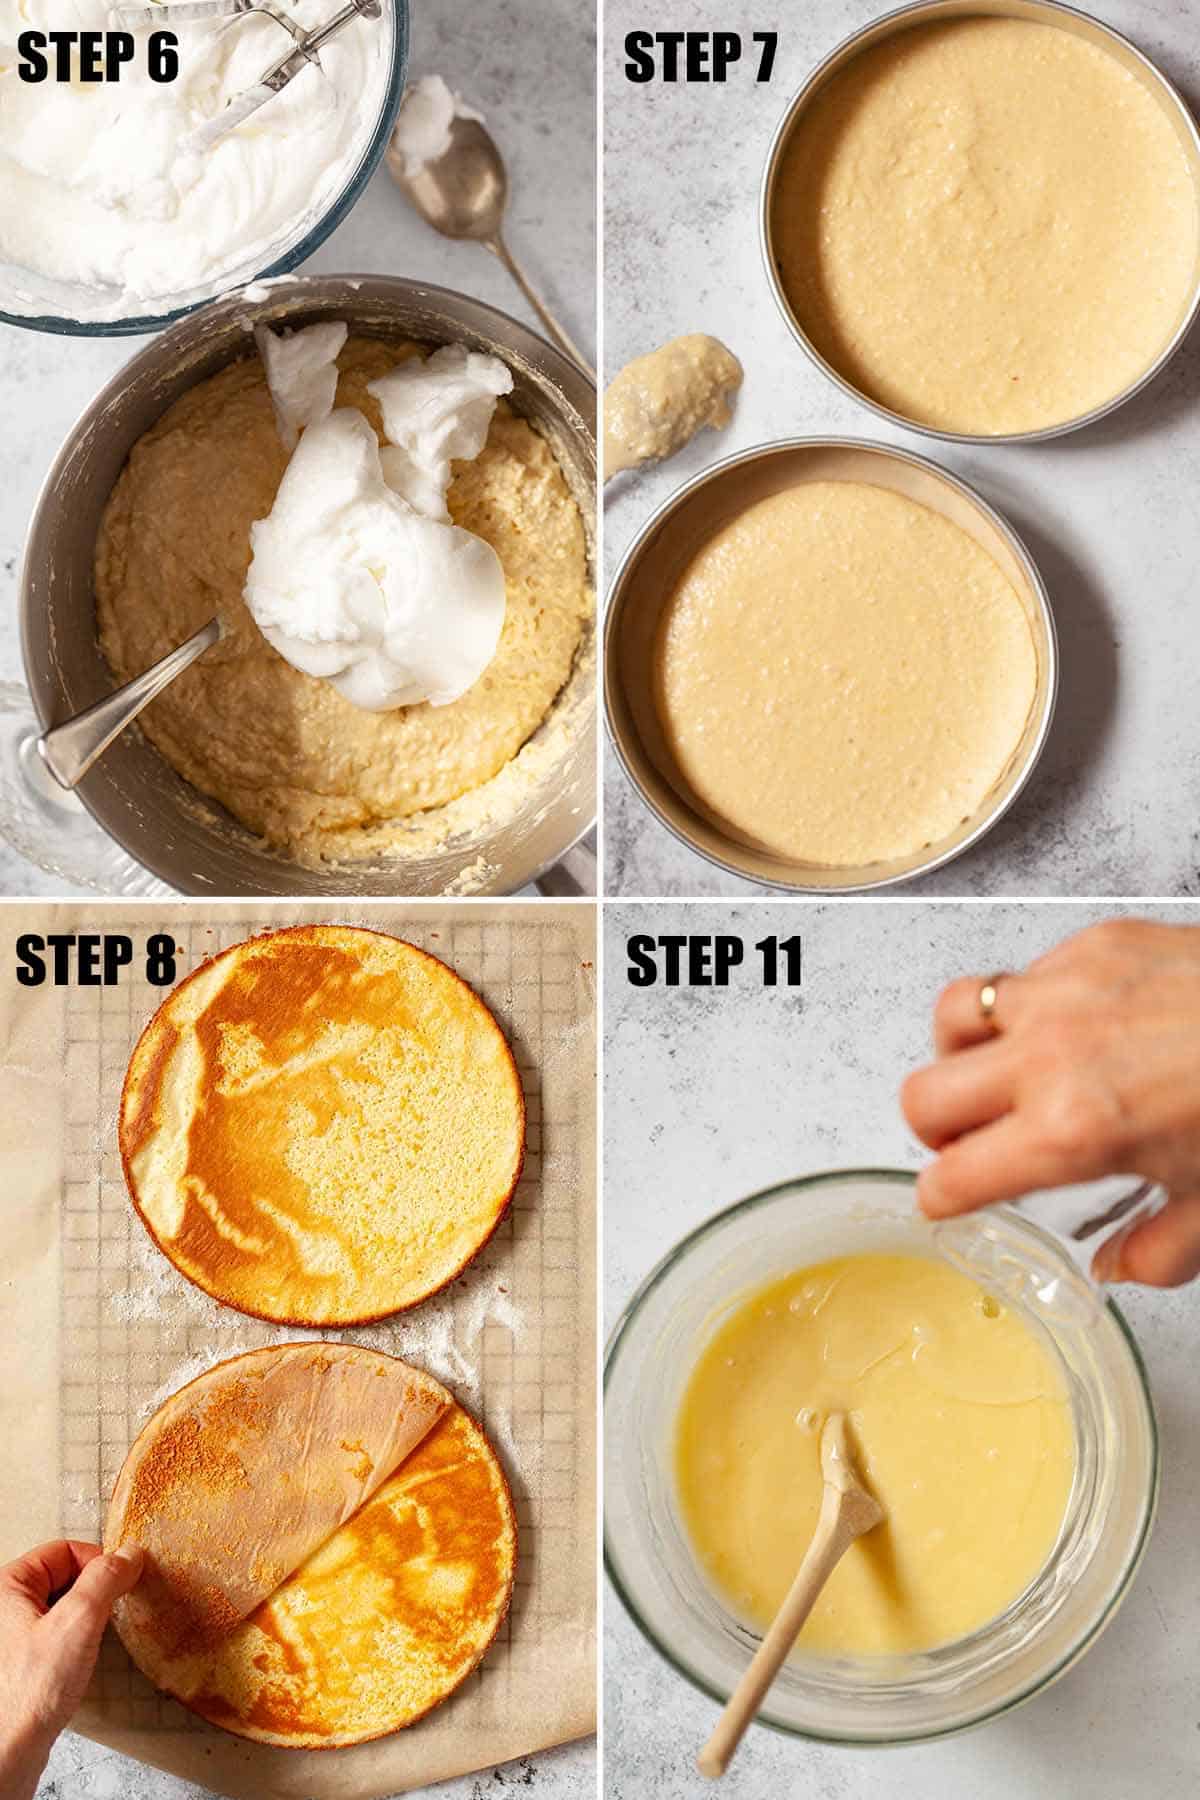 Collage of images showing the layers for an almond torte being made.